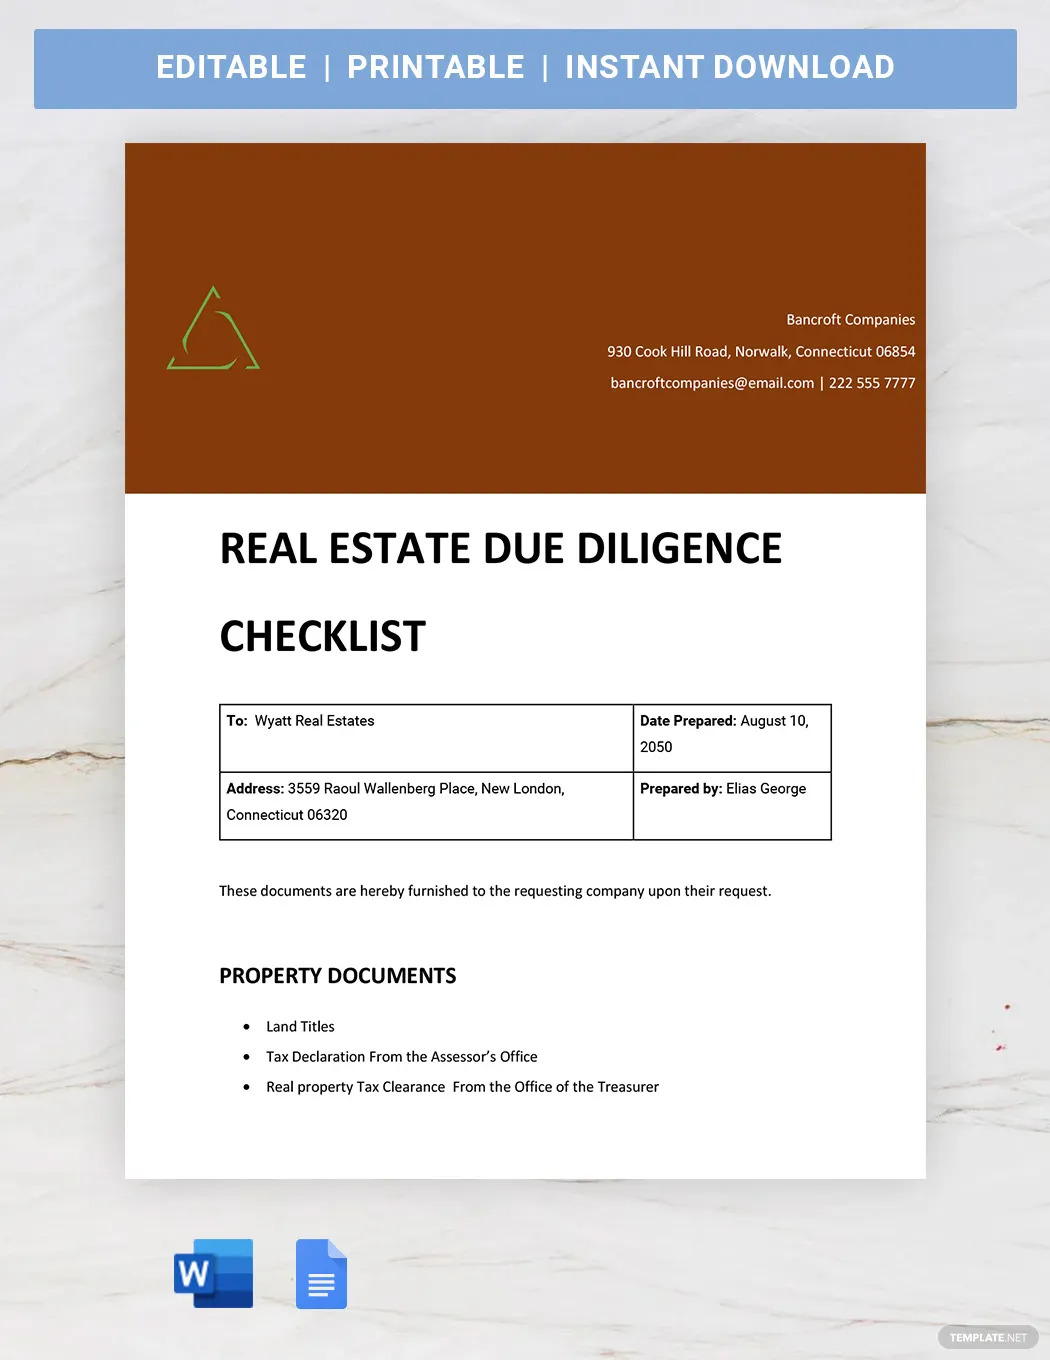 real estate due diligence ideas and examples